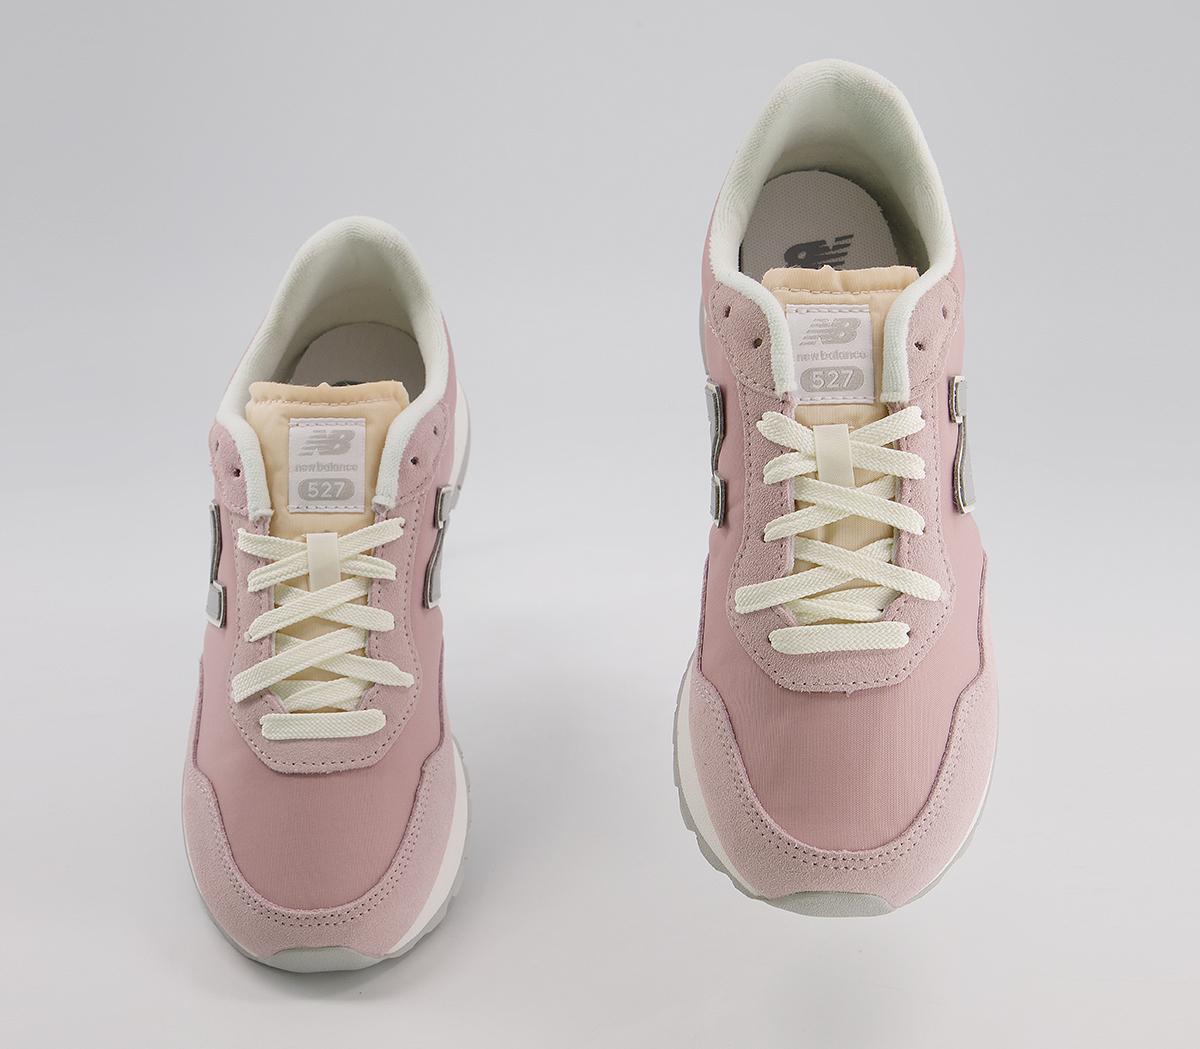 New Balance 527 Trainers Space Pink Rin Cloud - Women's Trainers